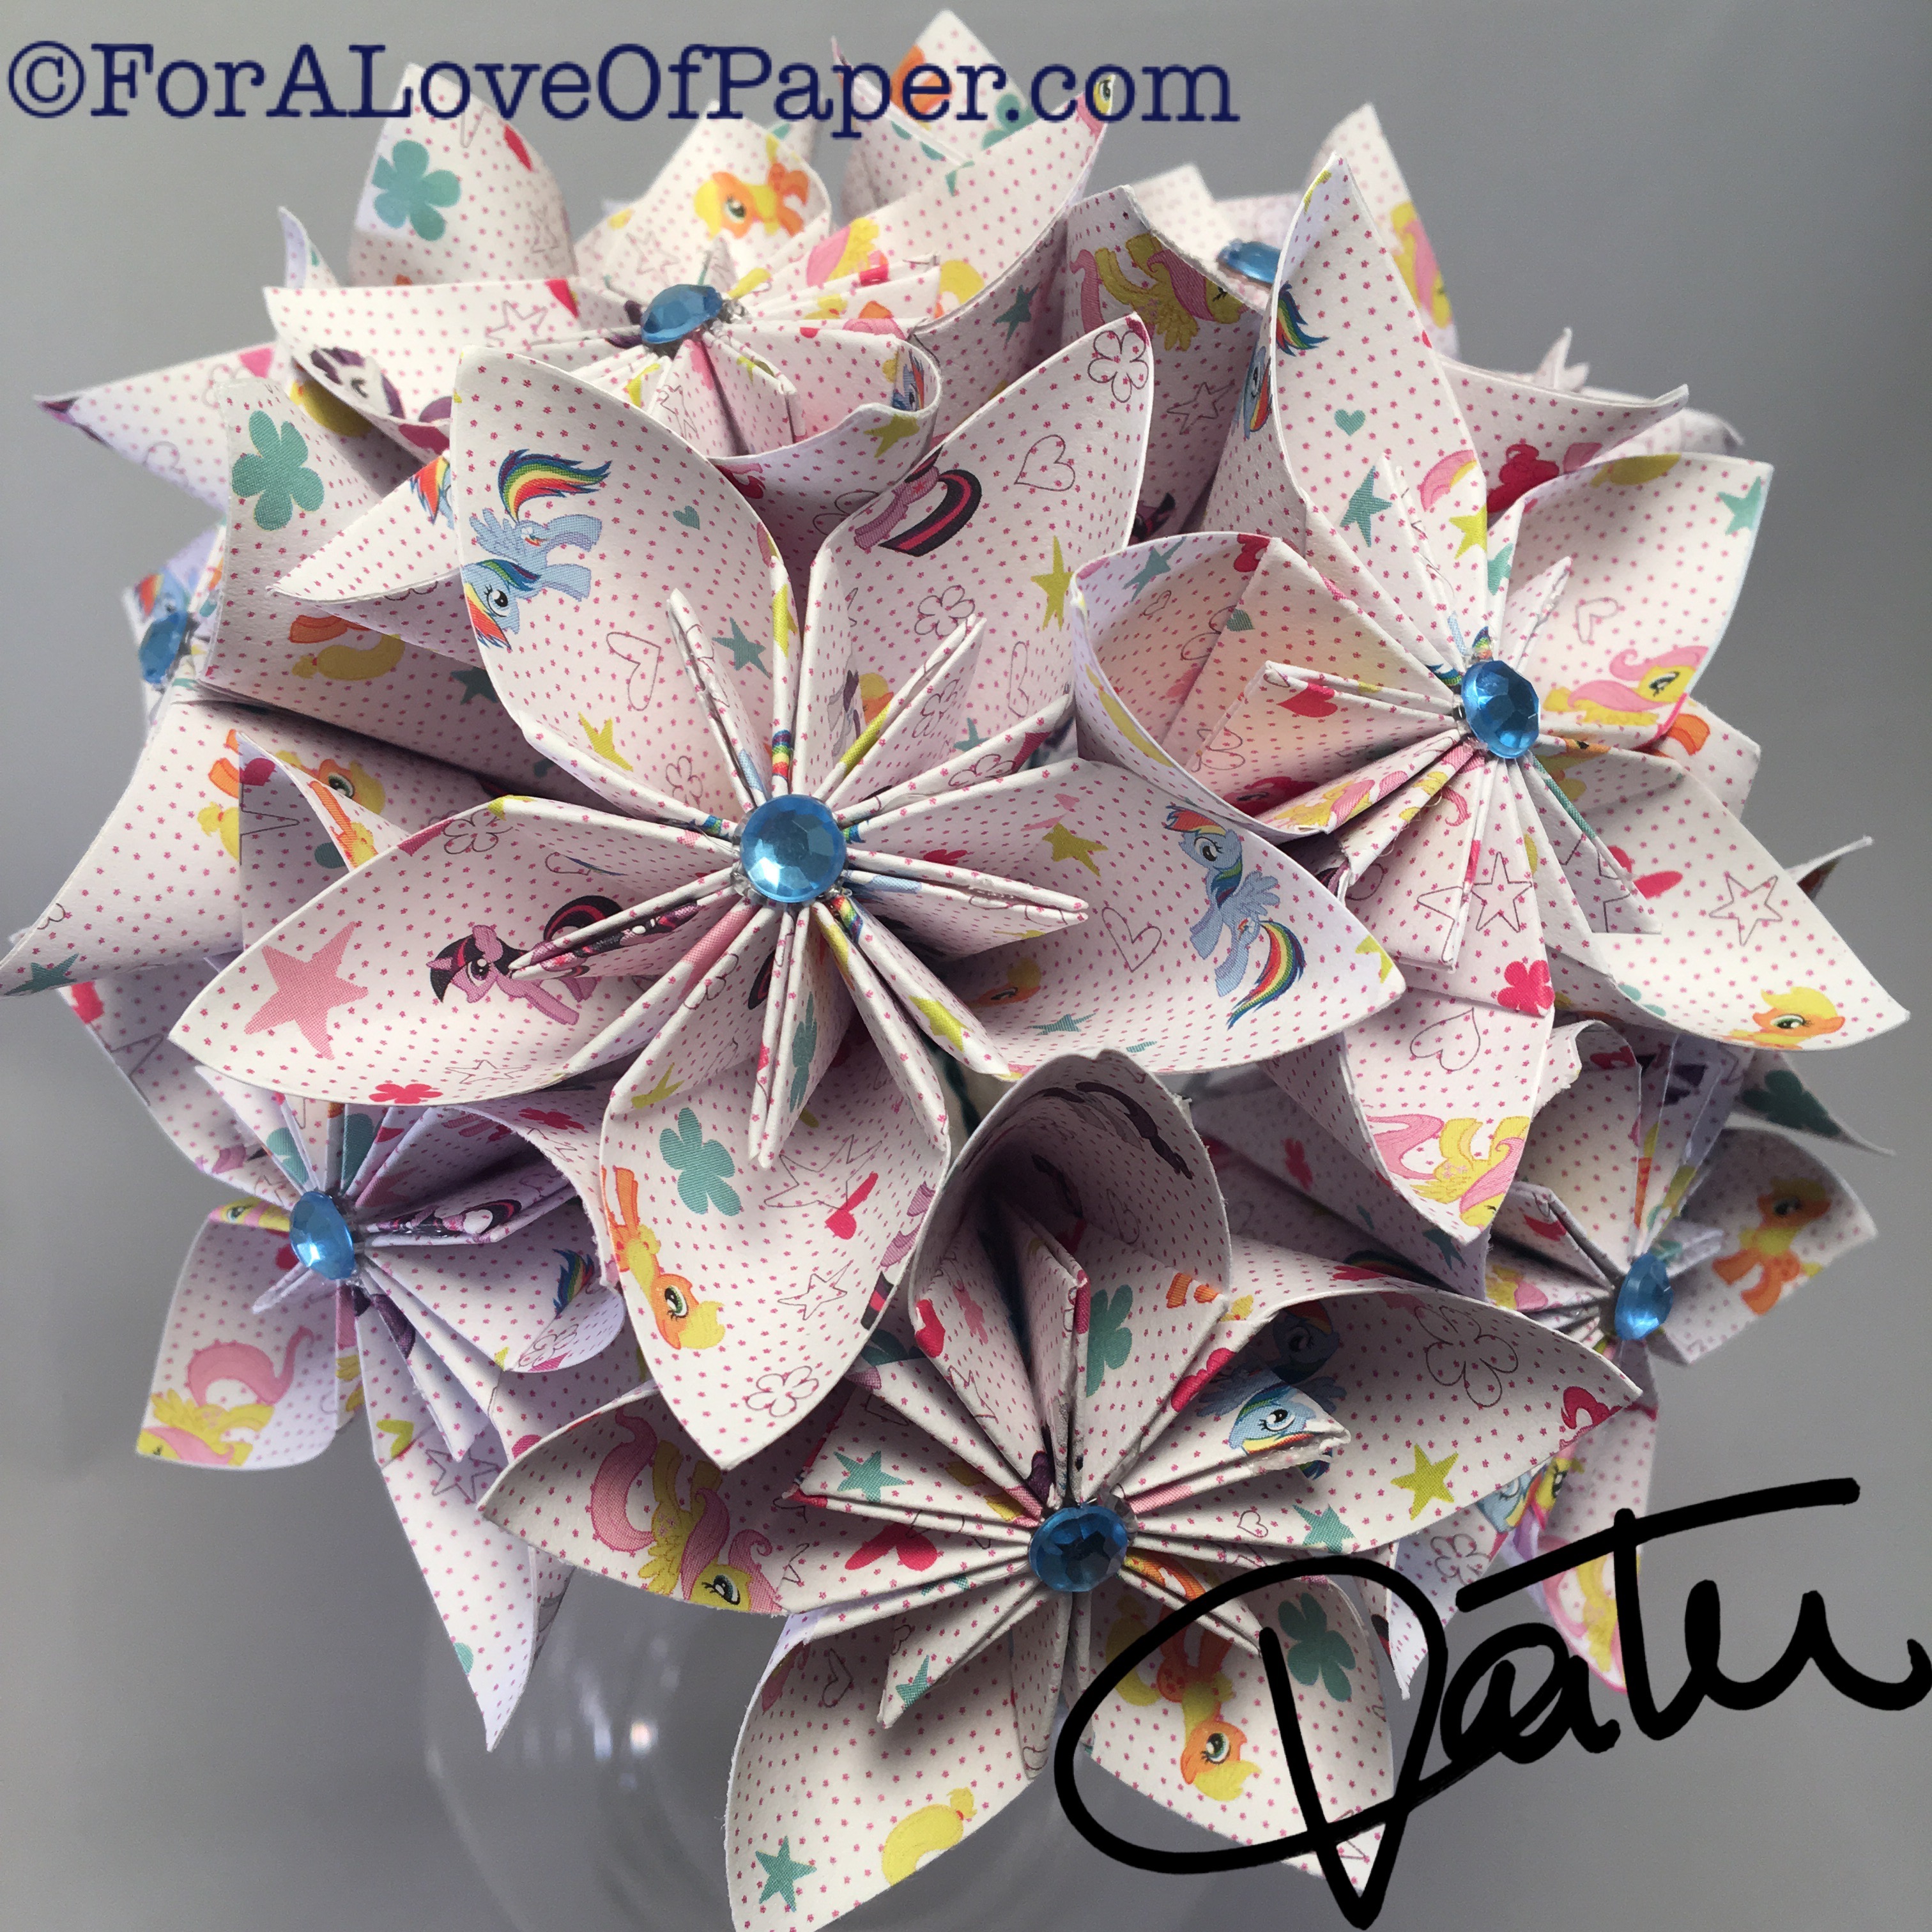 Paper flower bouquet made from my little pony paper with blue gems